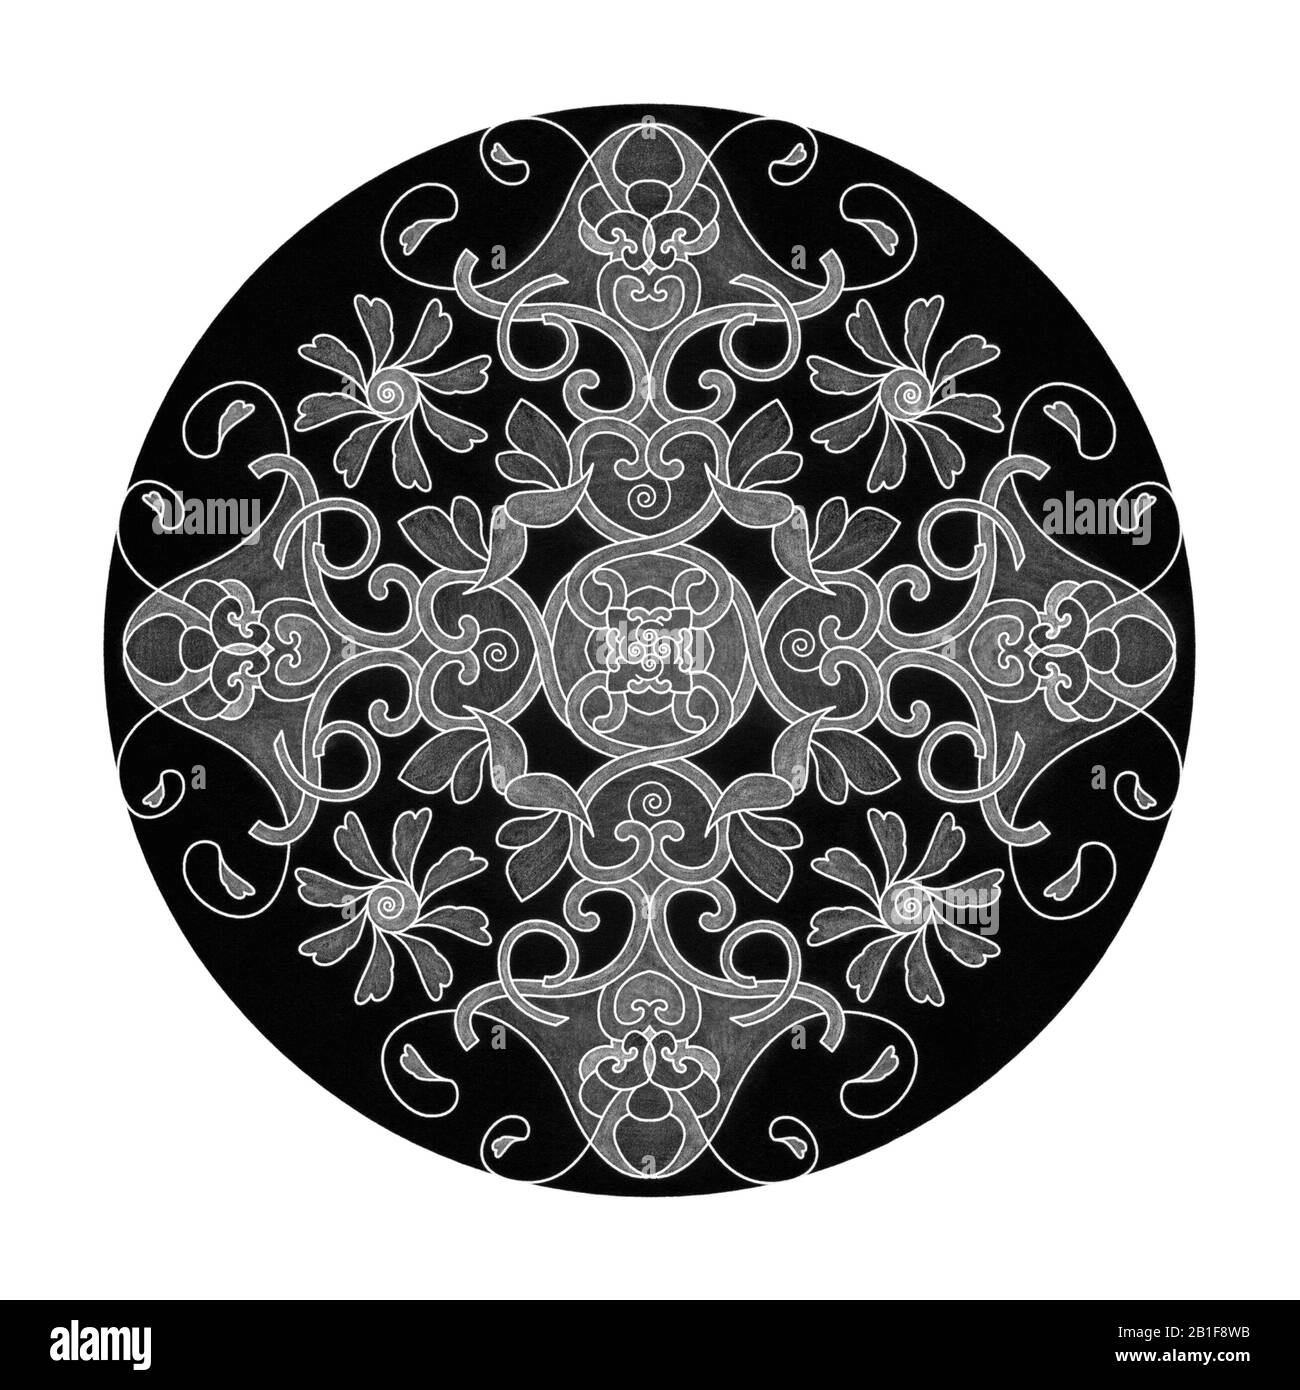 Colored pencil effects. Illustration mandala black, white and grey. Heart, spiral, bird and flower.Abstract. Decorative element. Stock Photo